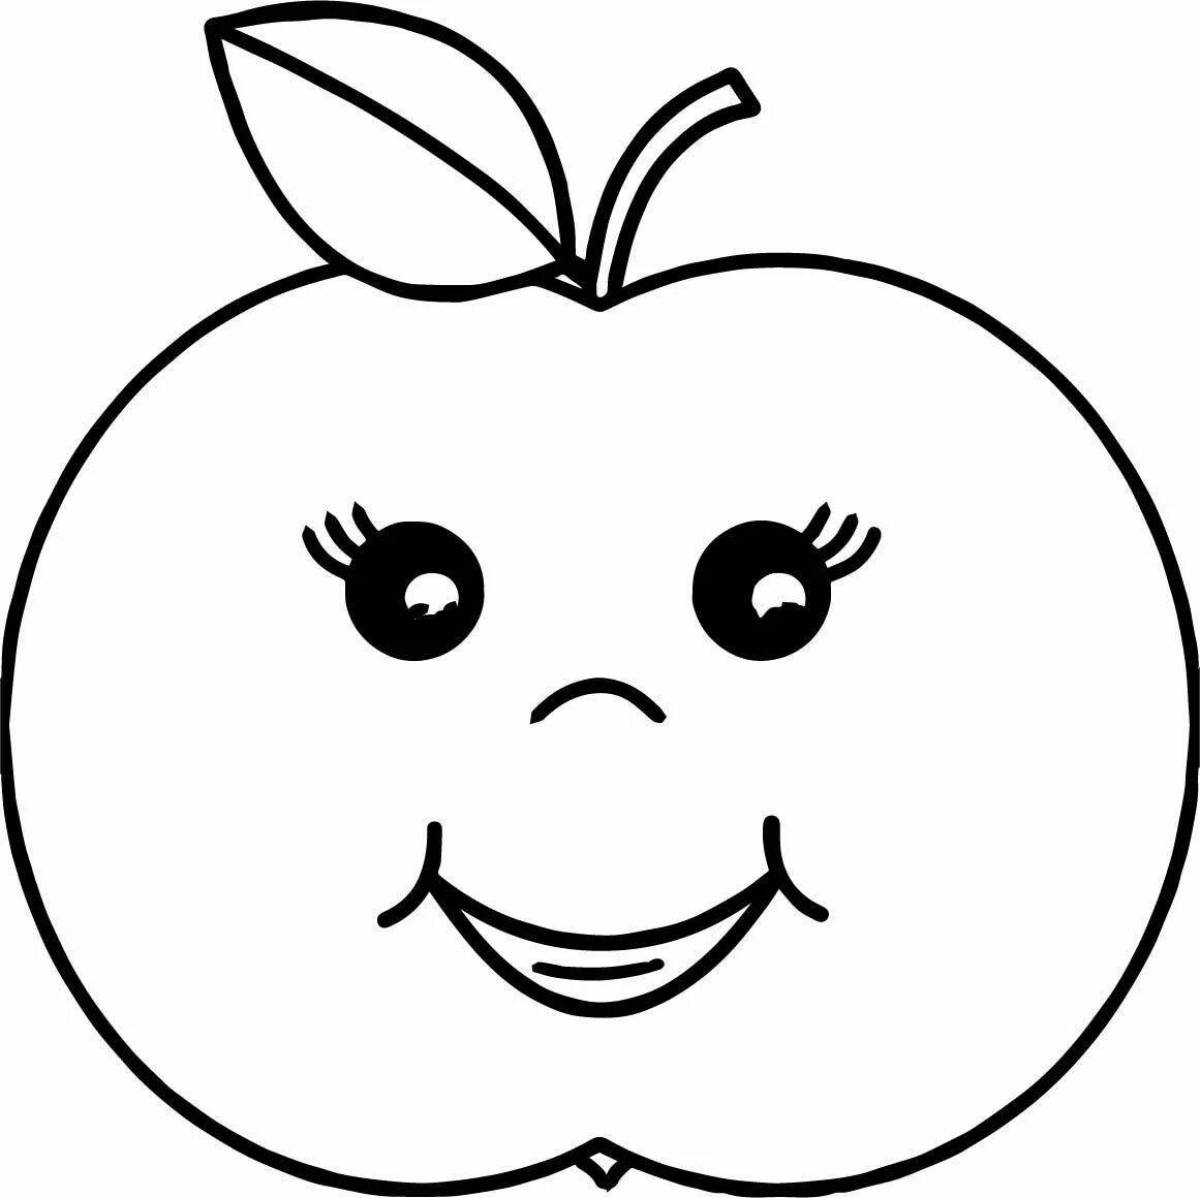 Colorful apple coloring book for 4-5 year olds